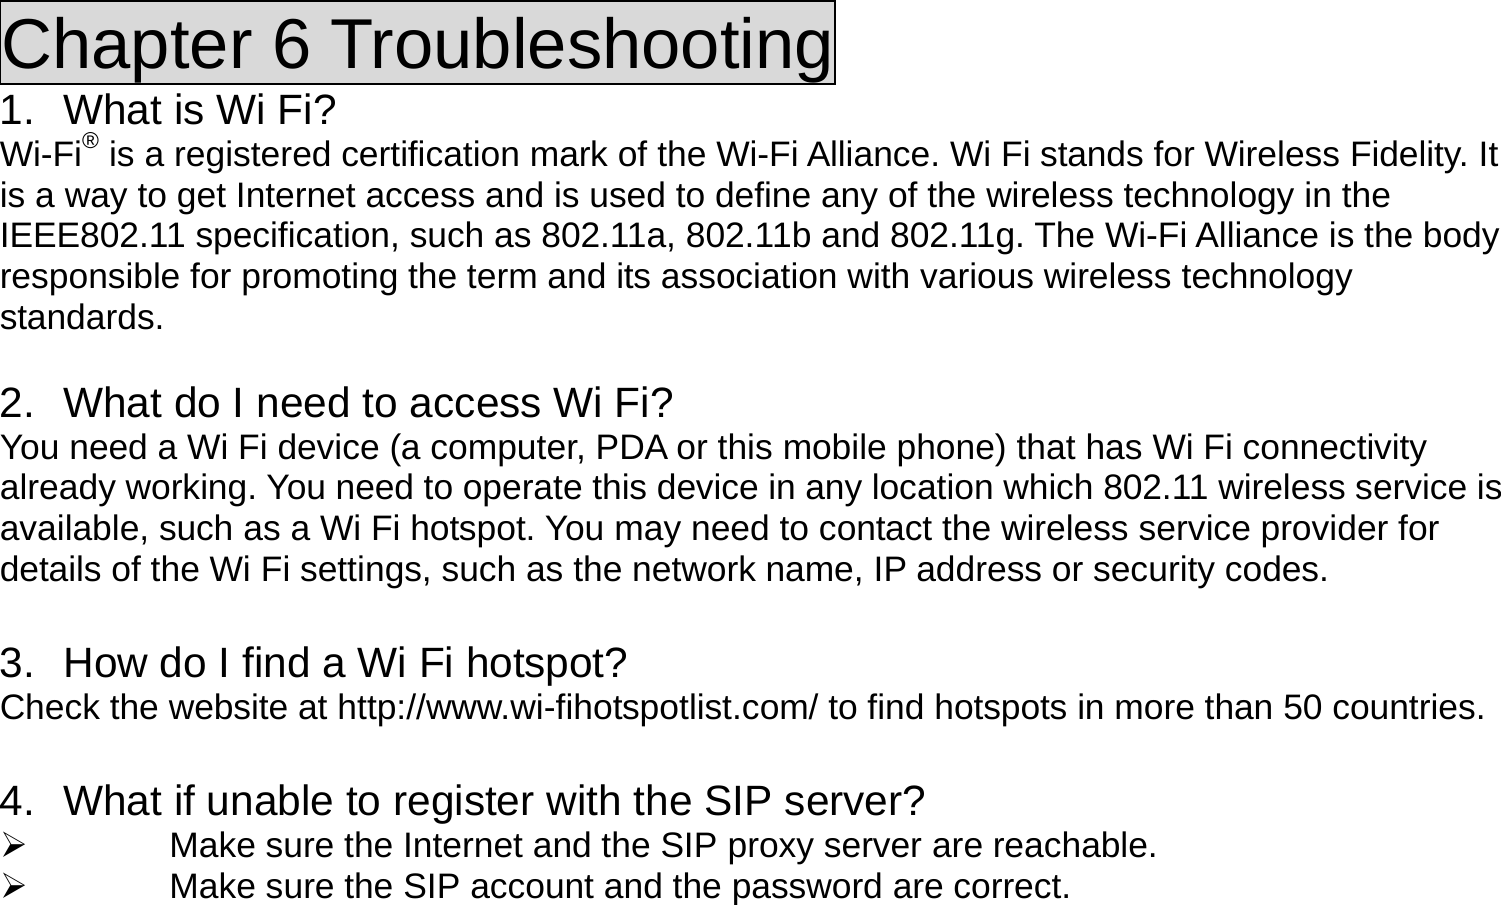 Chapter 6 Troubleshooting 1.  What is Wi Fi? Wi-Fi® is a registered certification mark of the Wi-Fi Alliance. Wi Fi stands for Wireless Fidelity. It is a way to get Internet access and is used to define any of the wireless technology in the IEEE802.11 specification, such as 802.11a, 802.11b and 802.11g. The Wi-Fi Alliance is the body responsible for promoting the term and its association with various wireless technology standards.  2.  What do I need to access Wi Fi? You need a Wi Fi device (a computer, PDA or this mobile phone) that has Wi Fi connectivity already working. You need to operate this device in any location which 802.11 wireless service is available, such as a Wi Fi hotspot. You may need to contact the wireless service provider for details of the Wi Fi settings, such as the network name, IP address or security codes.  3.  How do I find a Wi Fi hotspot? Check the website at http://www.wi-fihotspotlist.com/ to find hotspots in more than 50 countries.  4.  What if unable to register with the SIP server?   Make sure the Internet and the SIP proxy server are reachable.   Make sure the SIP account and the password are correct.  